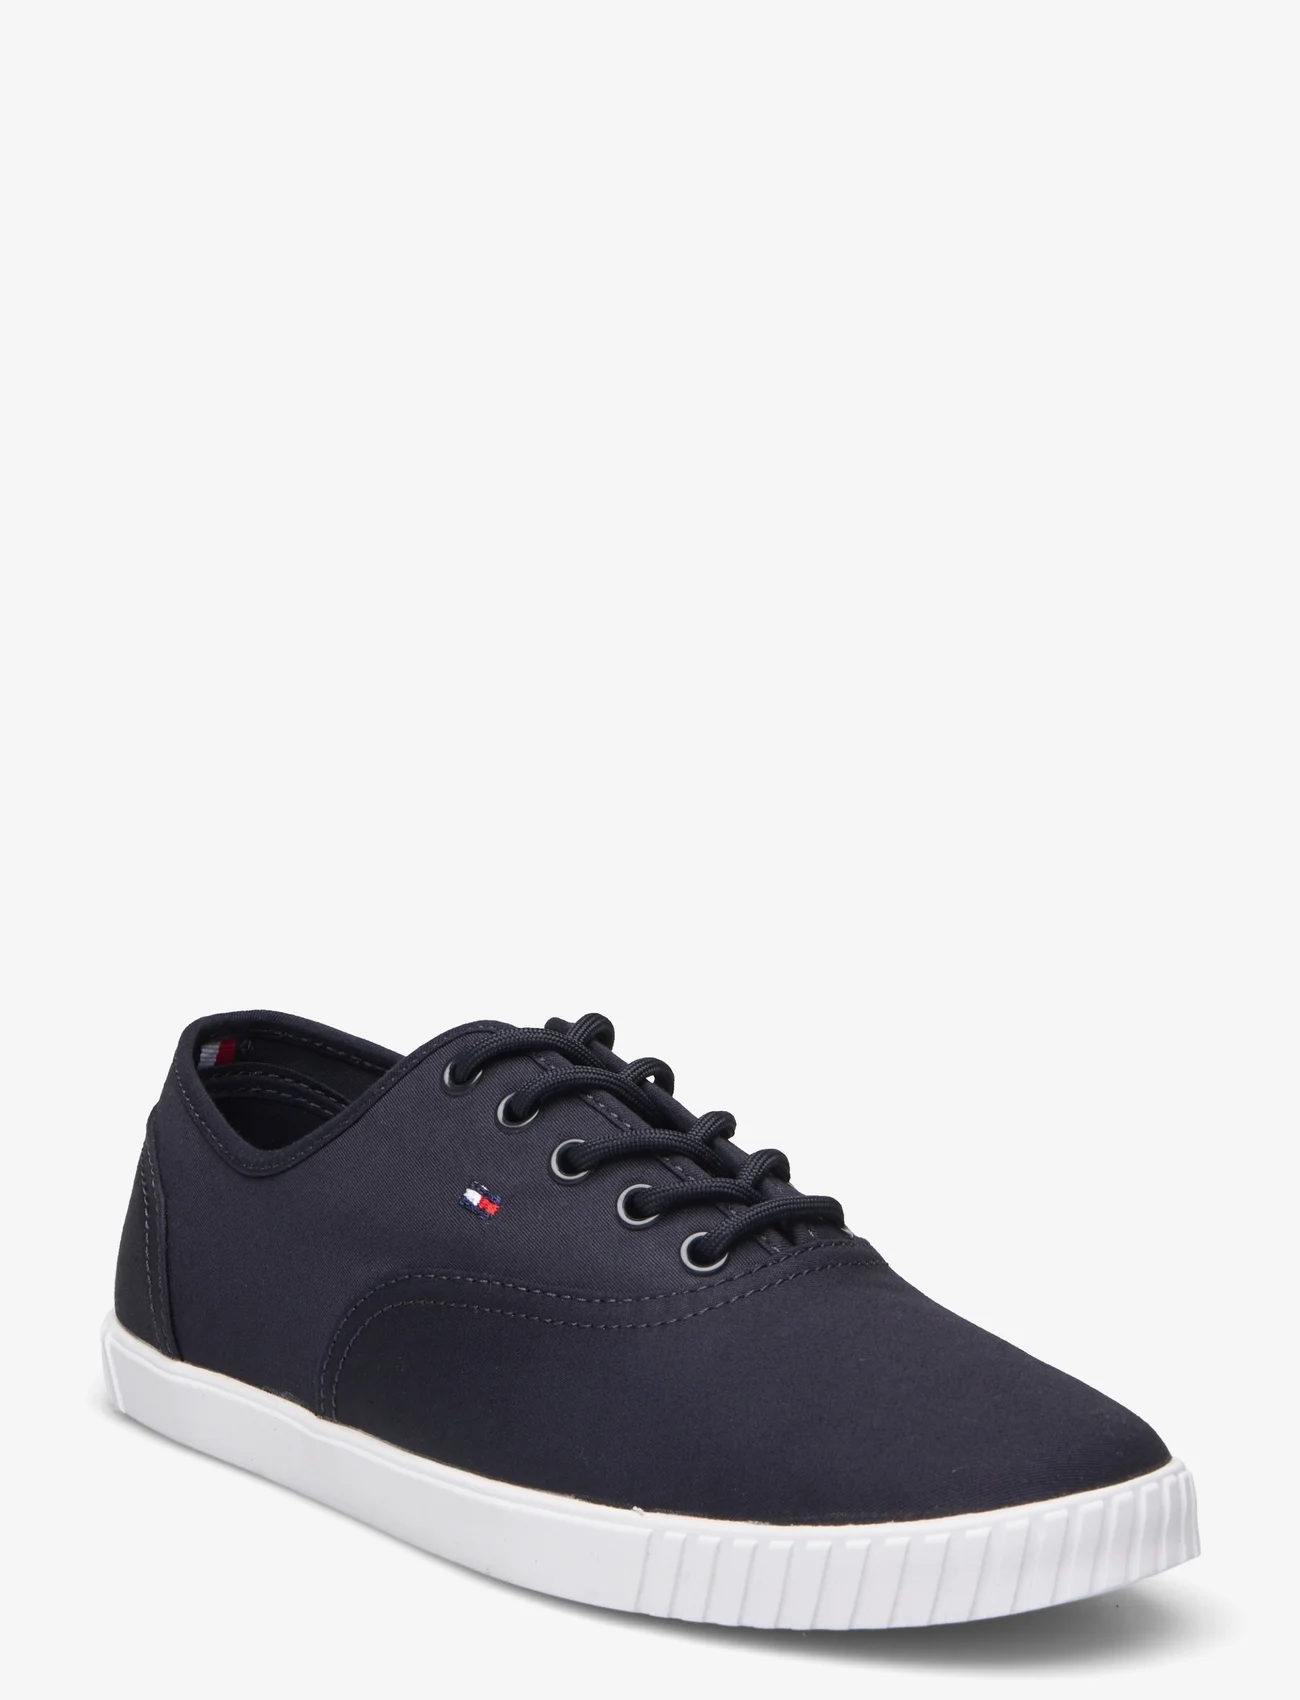 Tommy Hilfiger - CANVAS LACE UP SNEAKER - tenisówki - space blue - 0